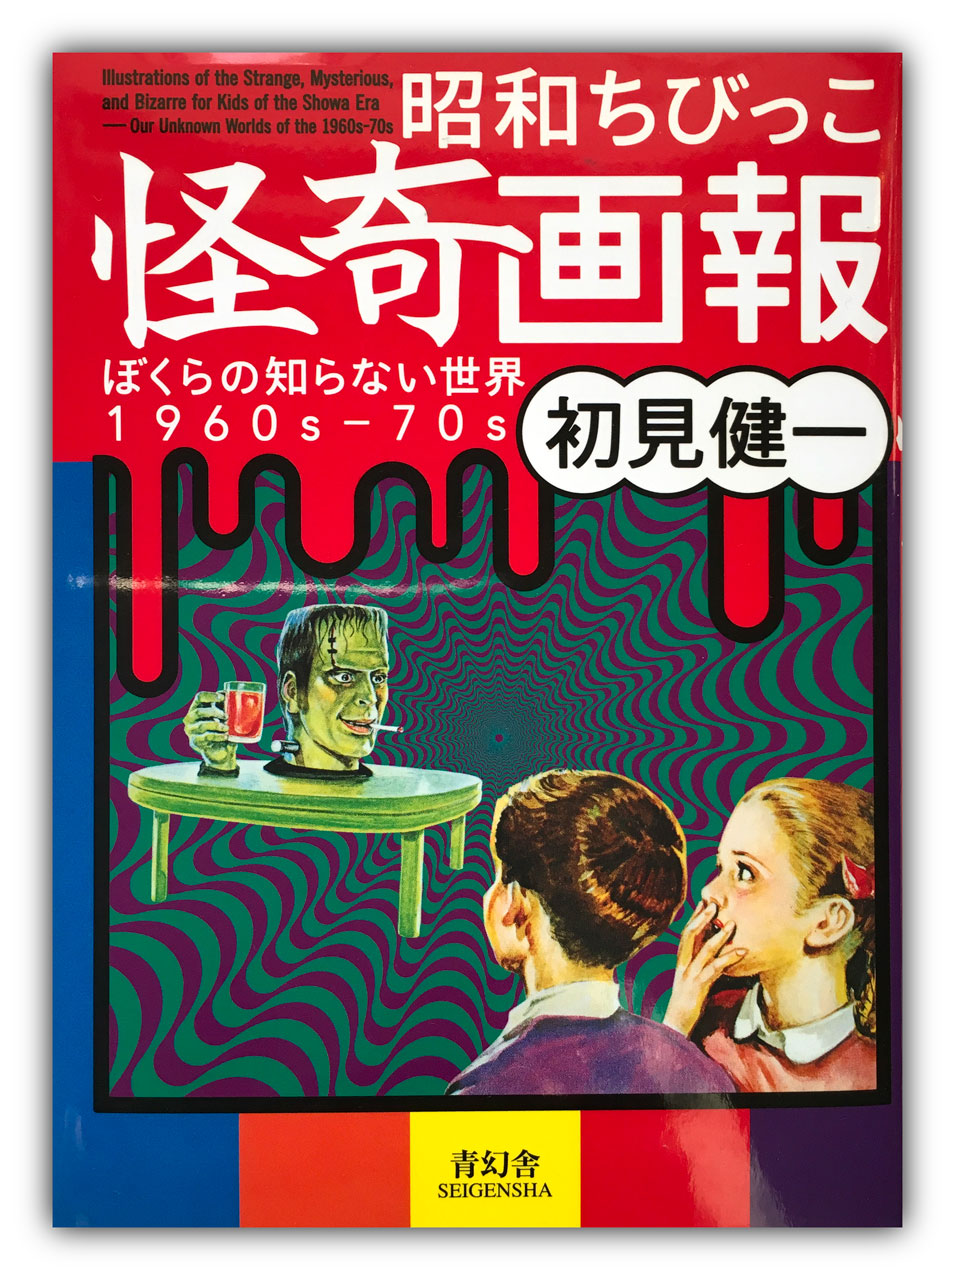 ILLUSTRATIONS OF THE STRANGE, MYSTERIOUS, AND BIZARRE FOR KIDS OF THE SHOWA ERA / 1960s - 70s.